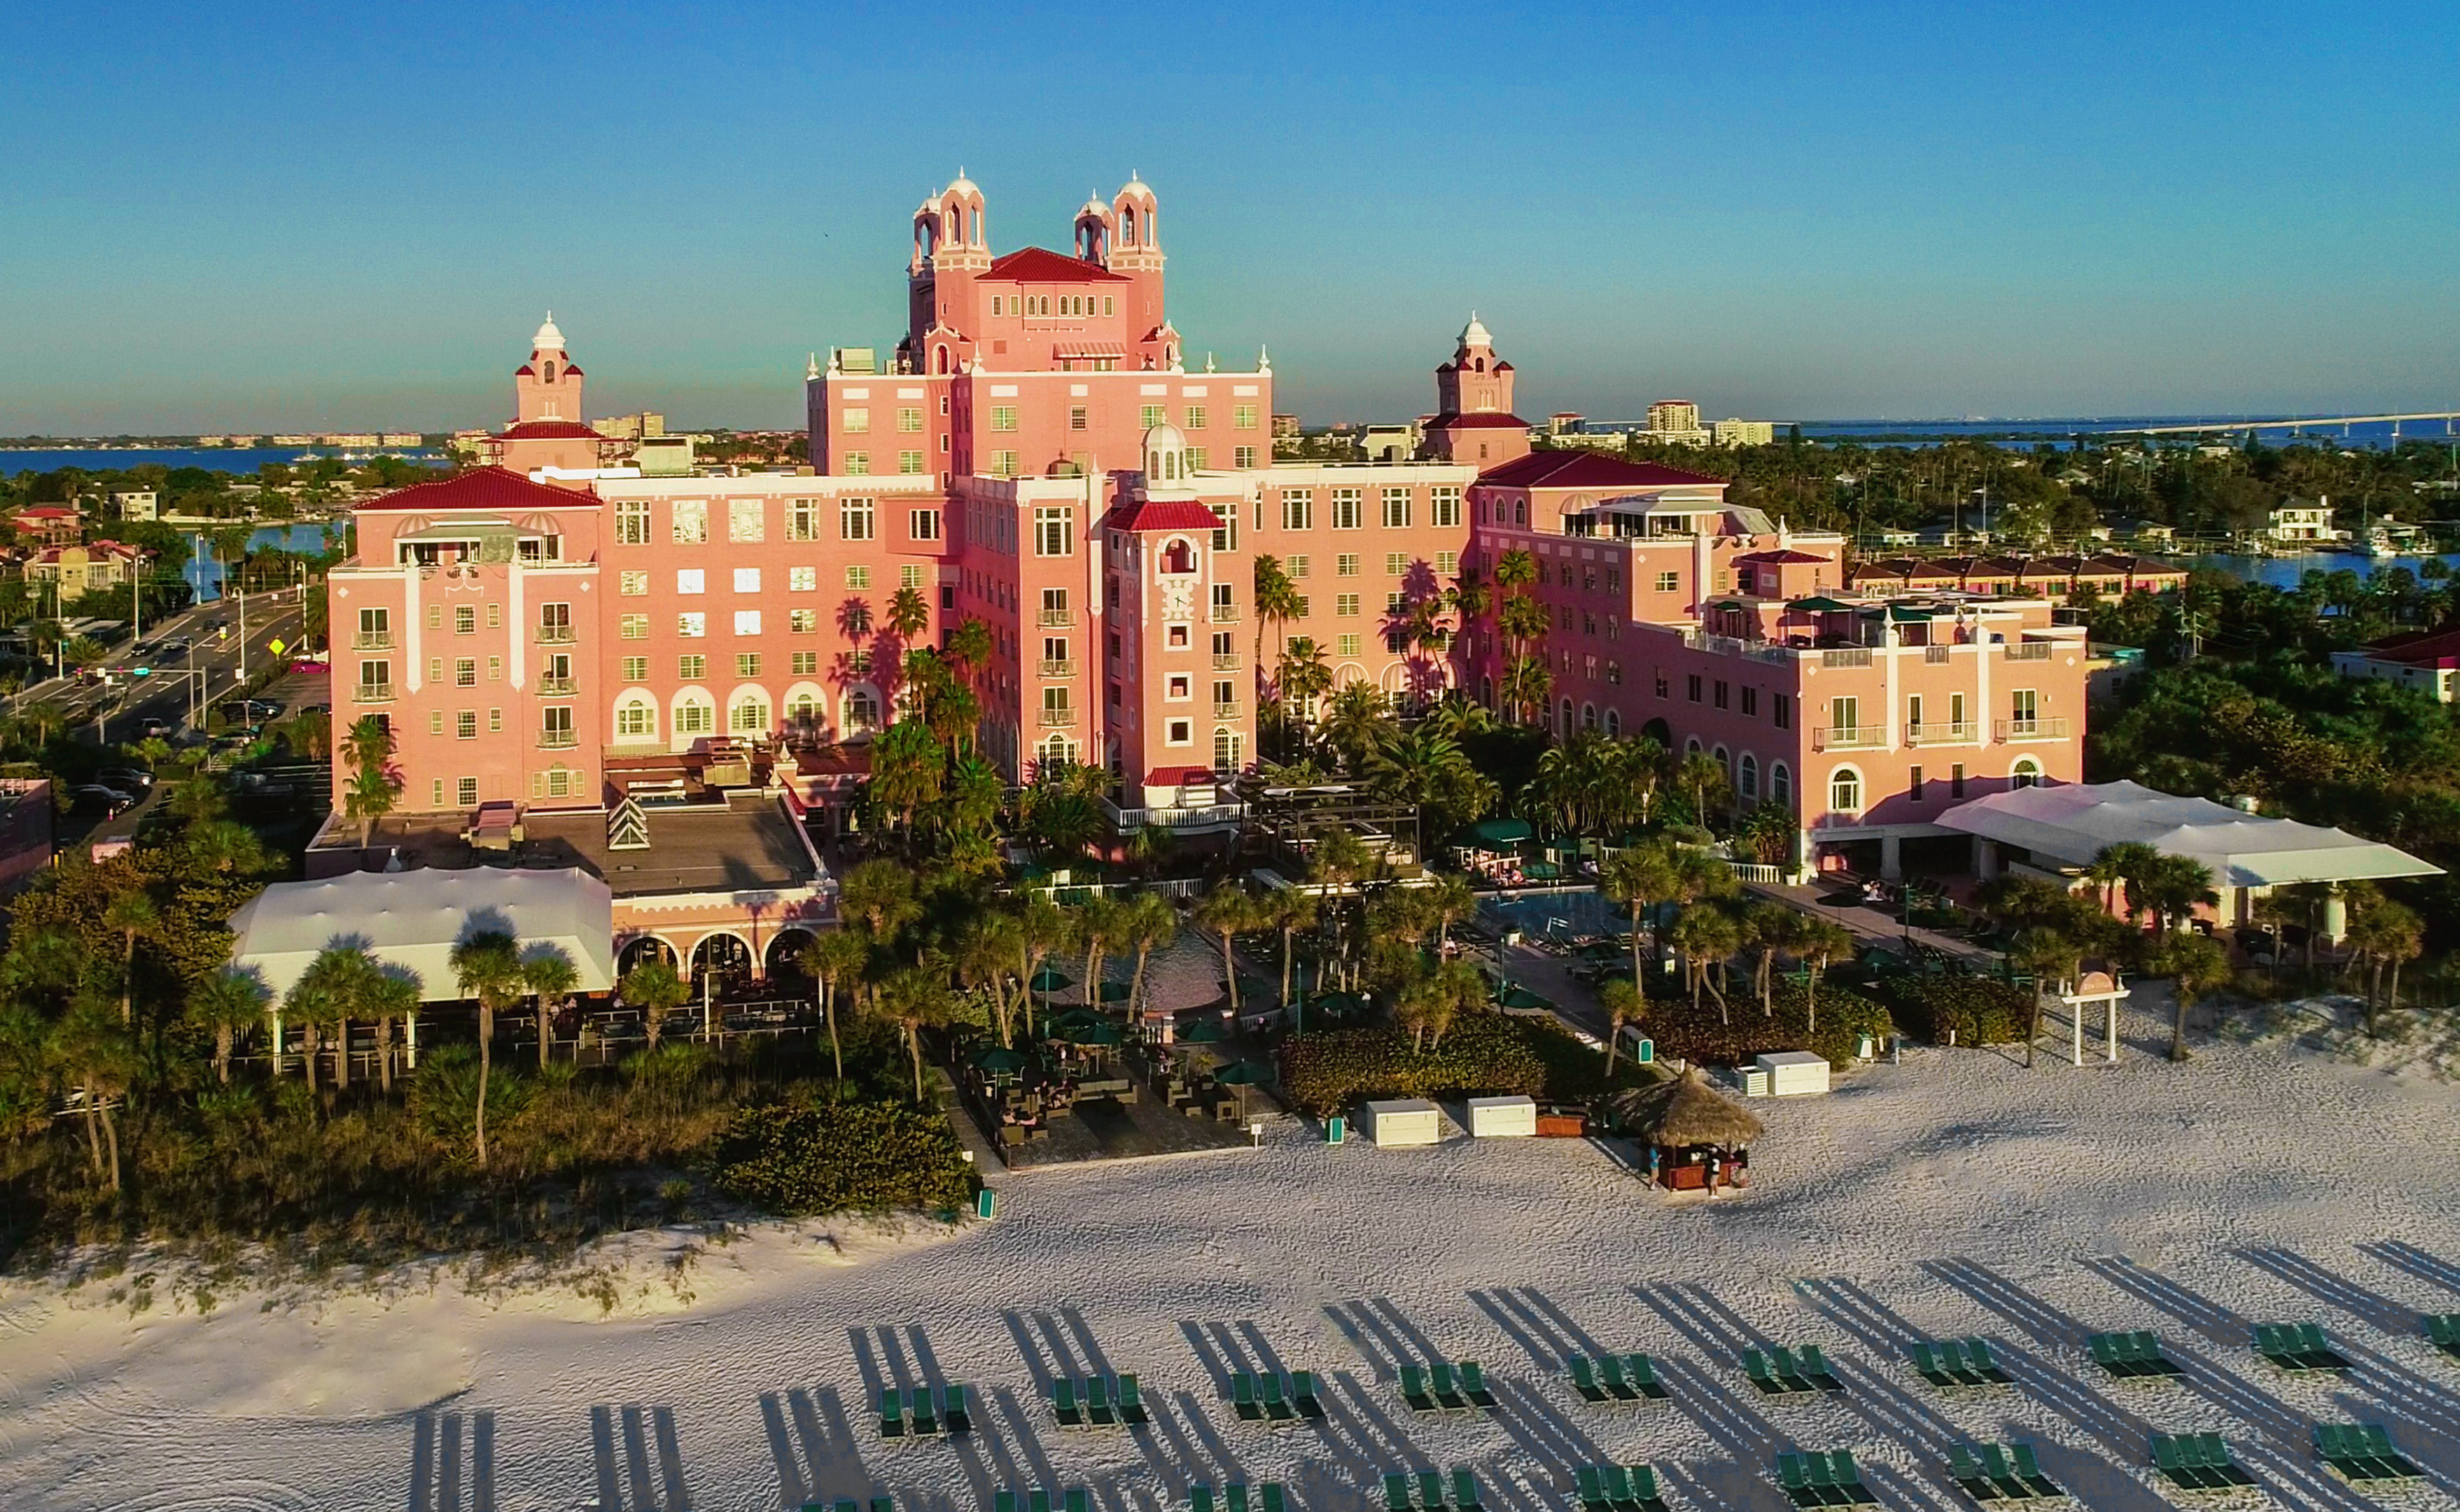 Plan your fall or winter escape now to The Don CeSar, a beloved Gulf Coast icon that originally opened in 1928 in St. Pete Beach, Fla.